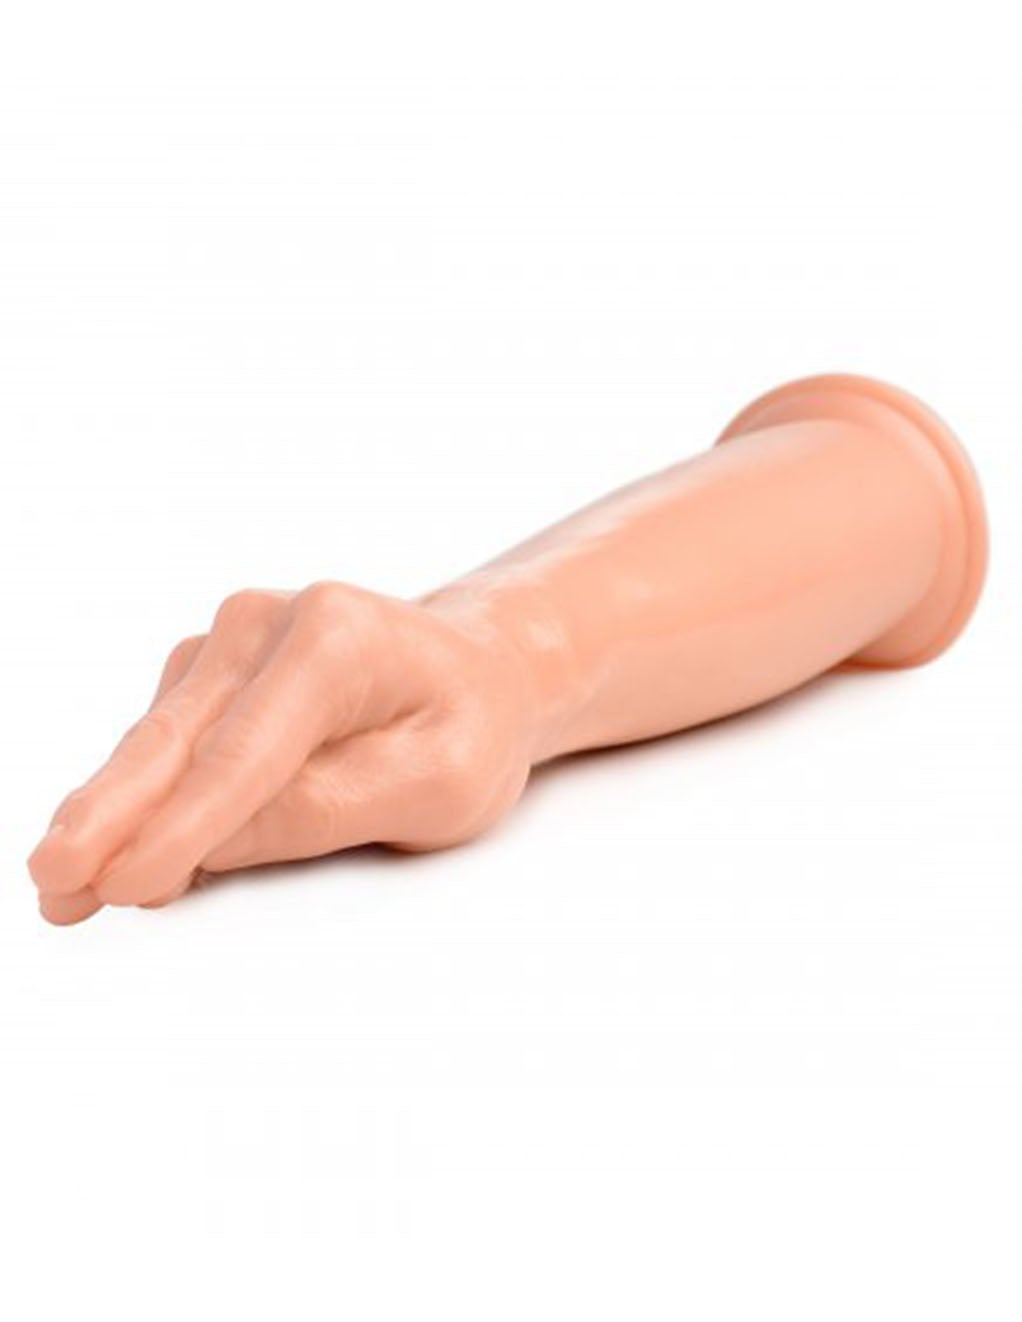 The Fister Hand and Forearm Dildo. Slide 3